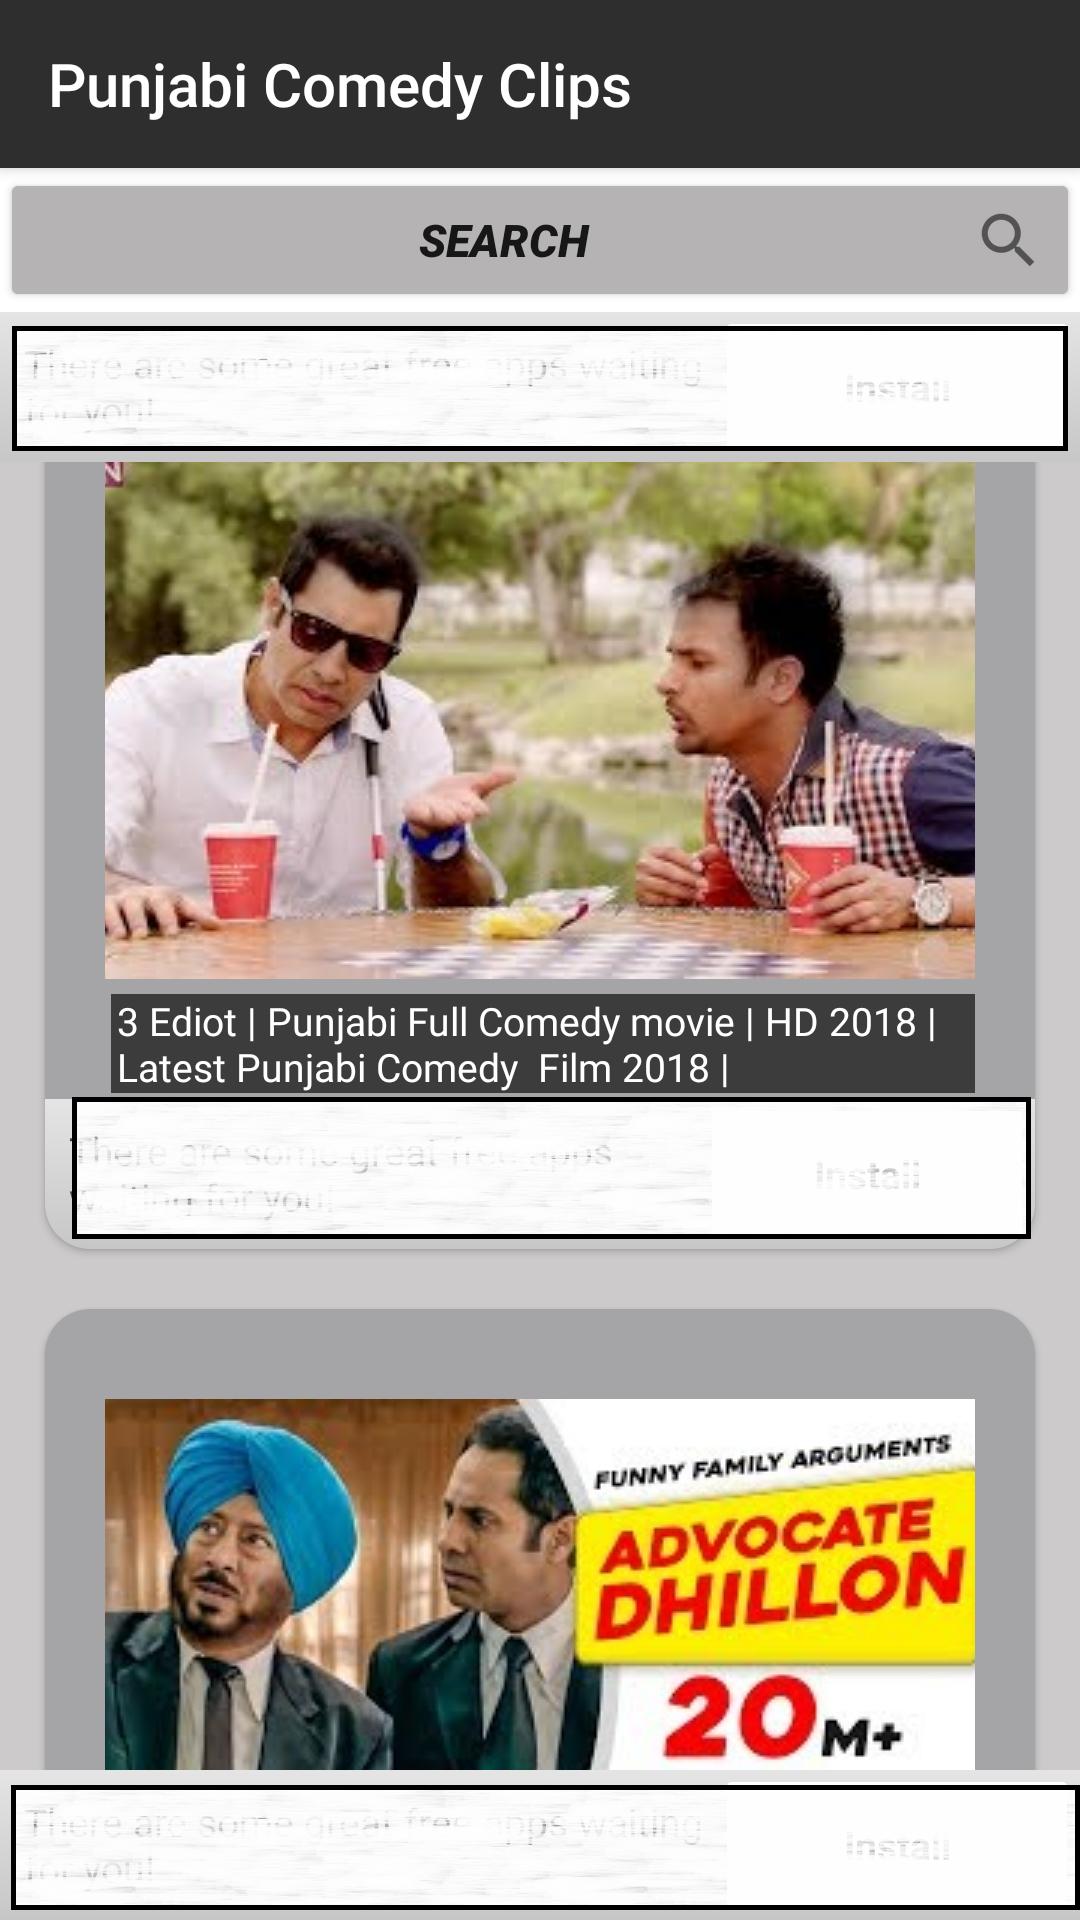 Punjabi Comedy Movie Clips for Android - APK Download